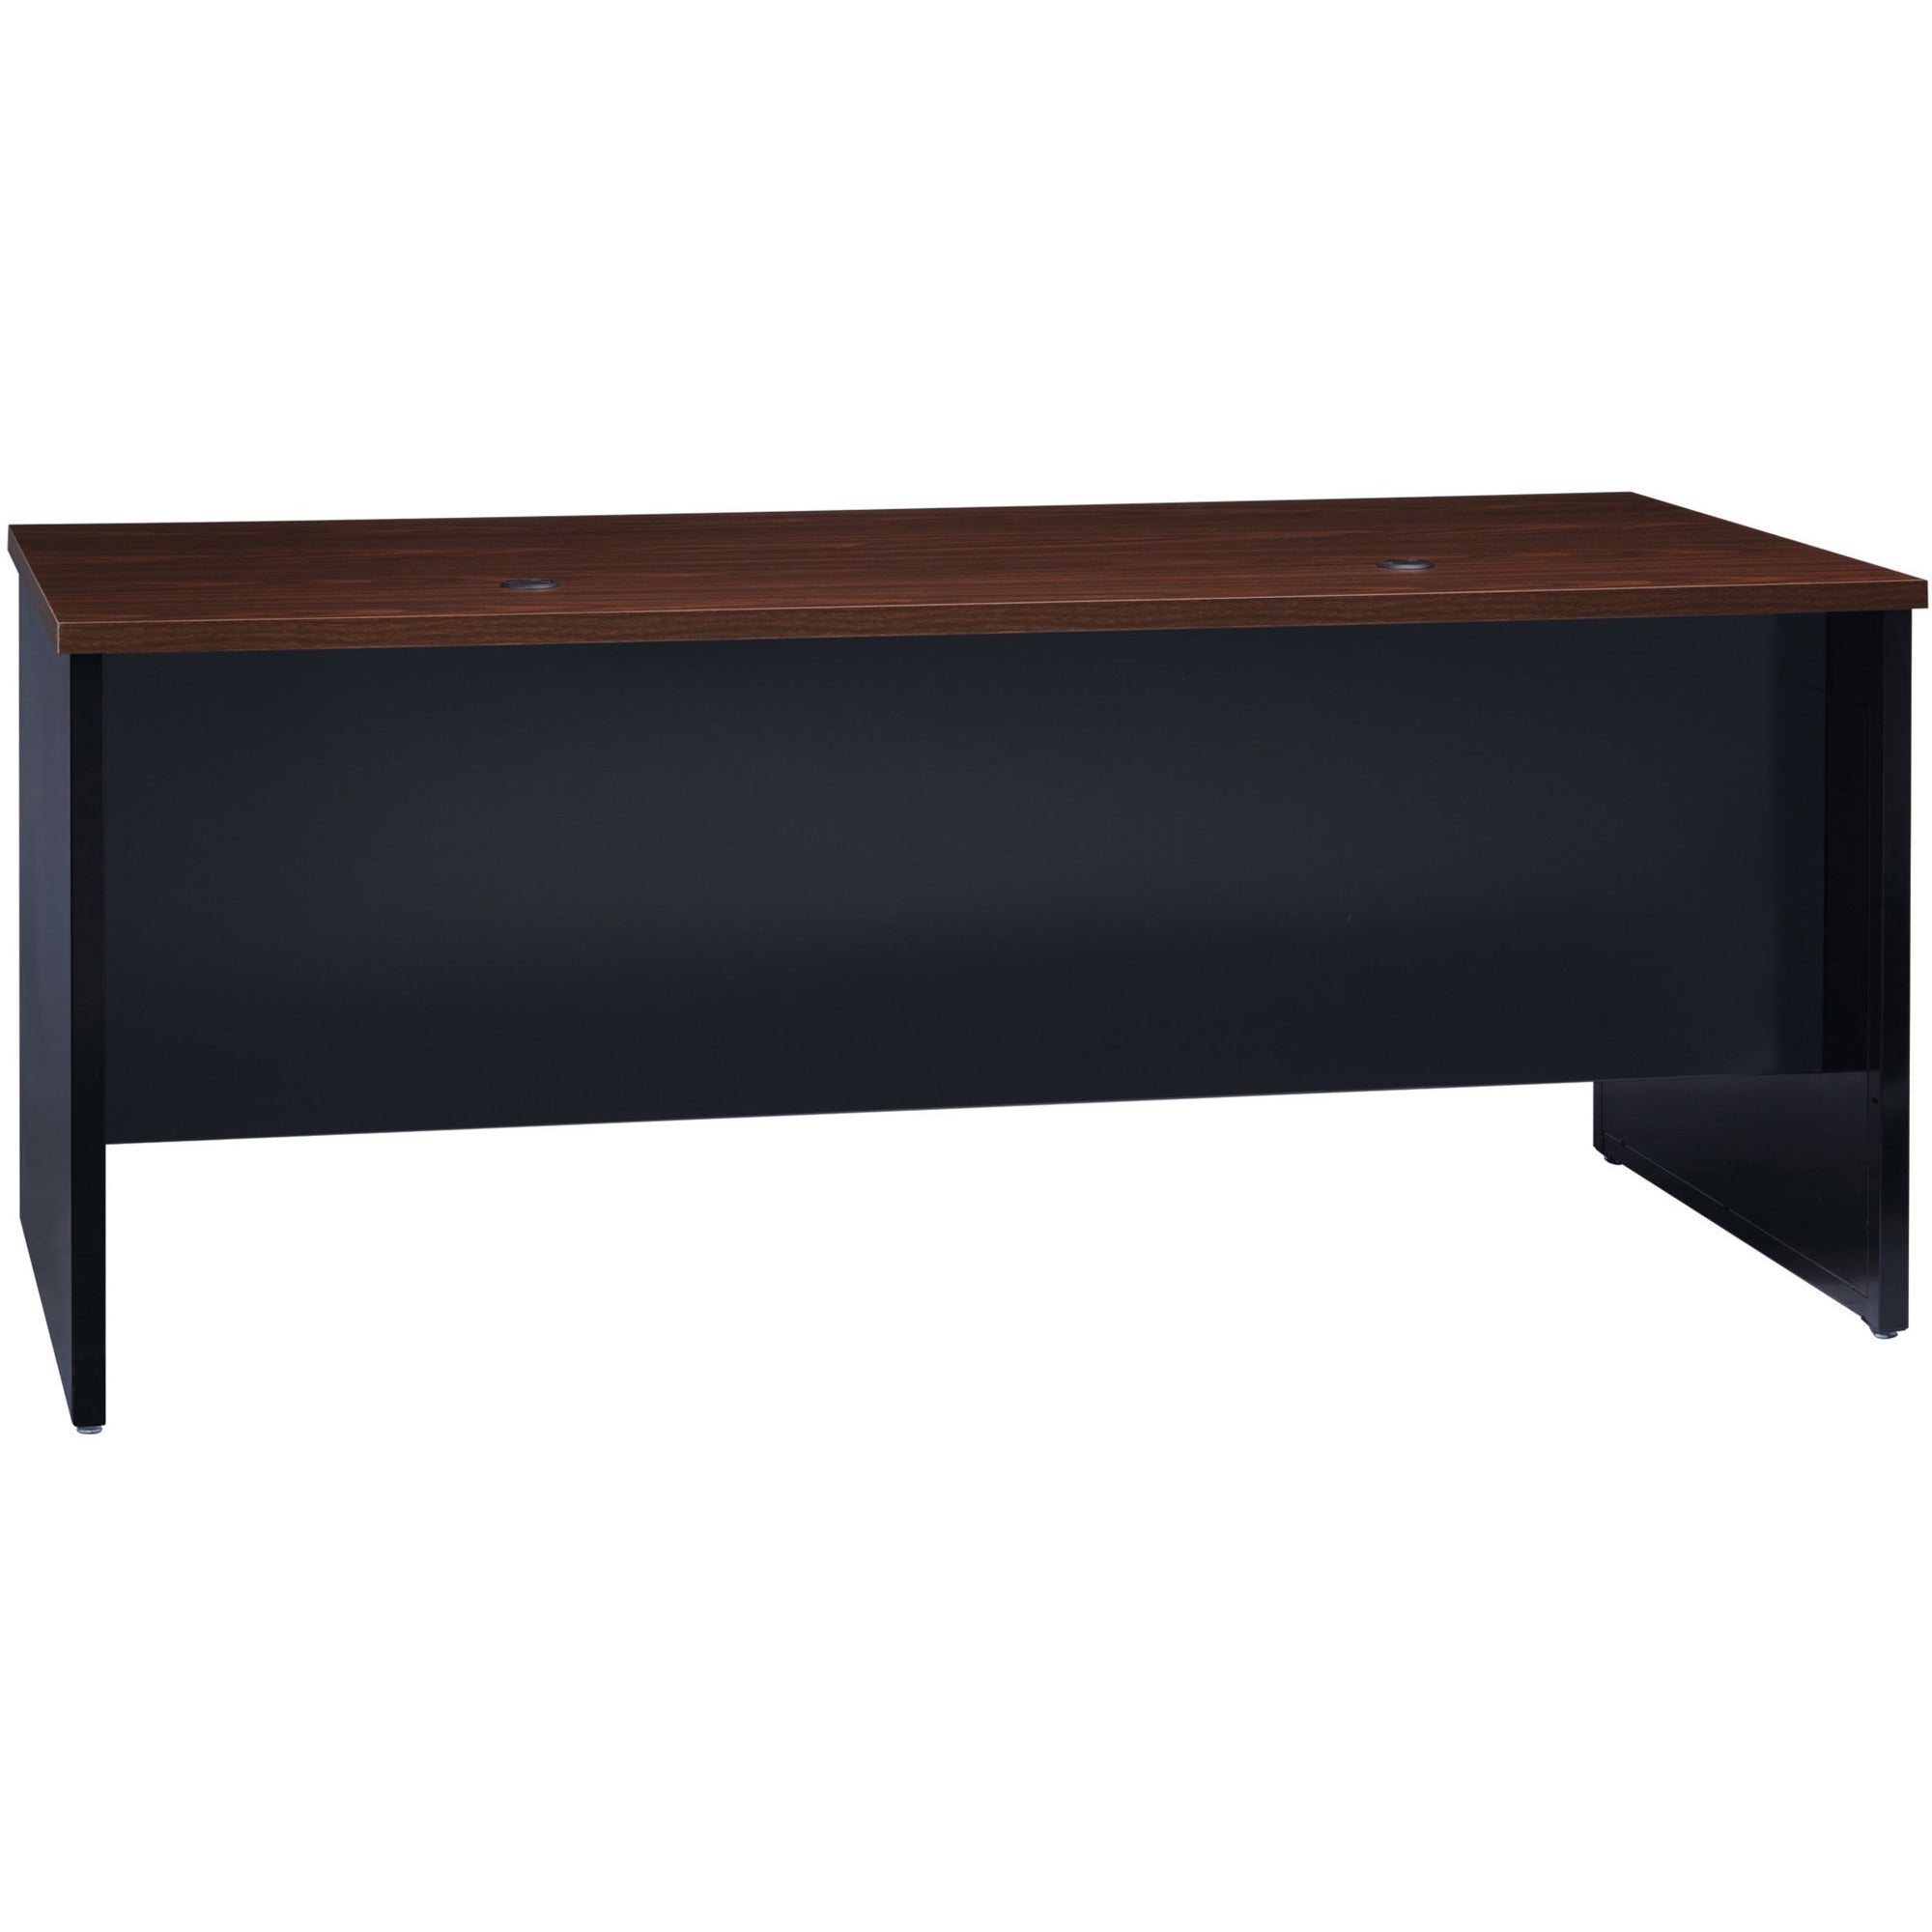 Lorell Fortress Modular Series Double-Pedestal Desk - 72" x 36" , 1.1" Top - 2 x Box, File Drawer(s) - Double Pedestal - Material: Steel - Finish: Walnut Laminate, Black - Scratch Resistant, Stain Resistant, Ball-bearing Suspension, Grommet, Handle, - 